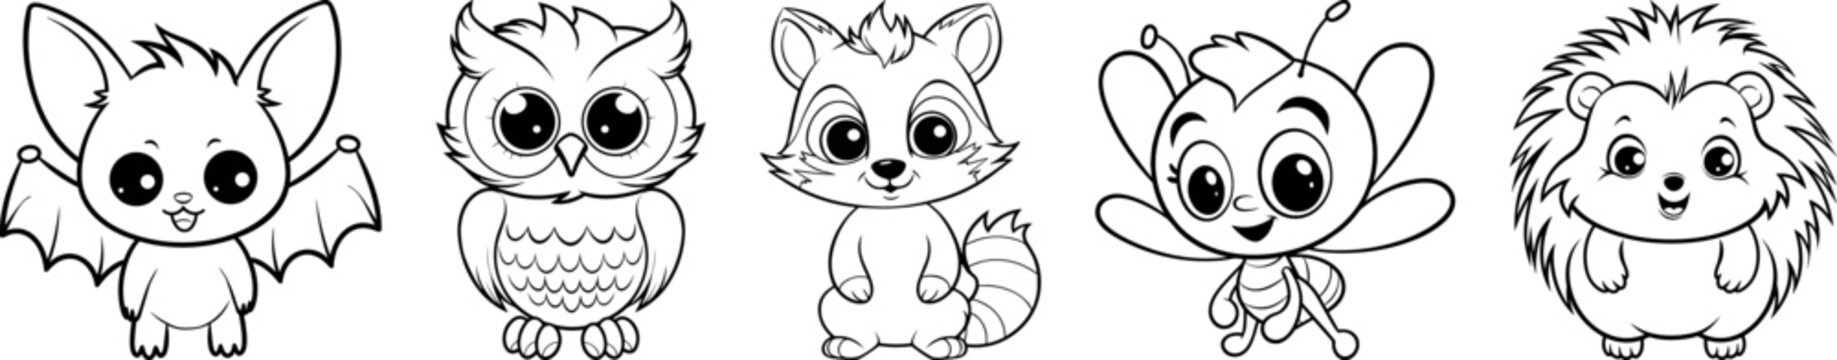 Nocturnal animals friendly cartoon characters collection. Bat, owl, raccoon, firefly and hedgehog animal friends. Black outline coloring book vector illustrations.